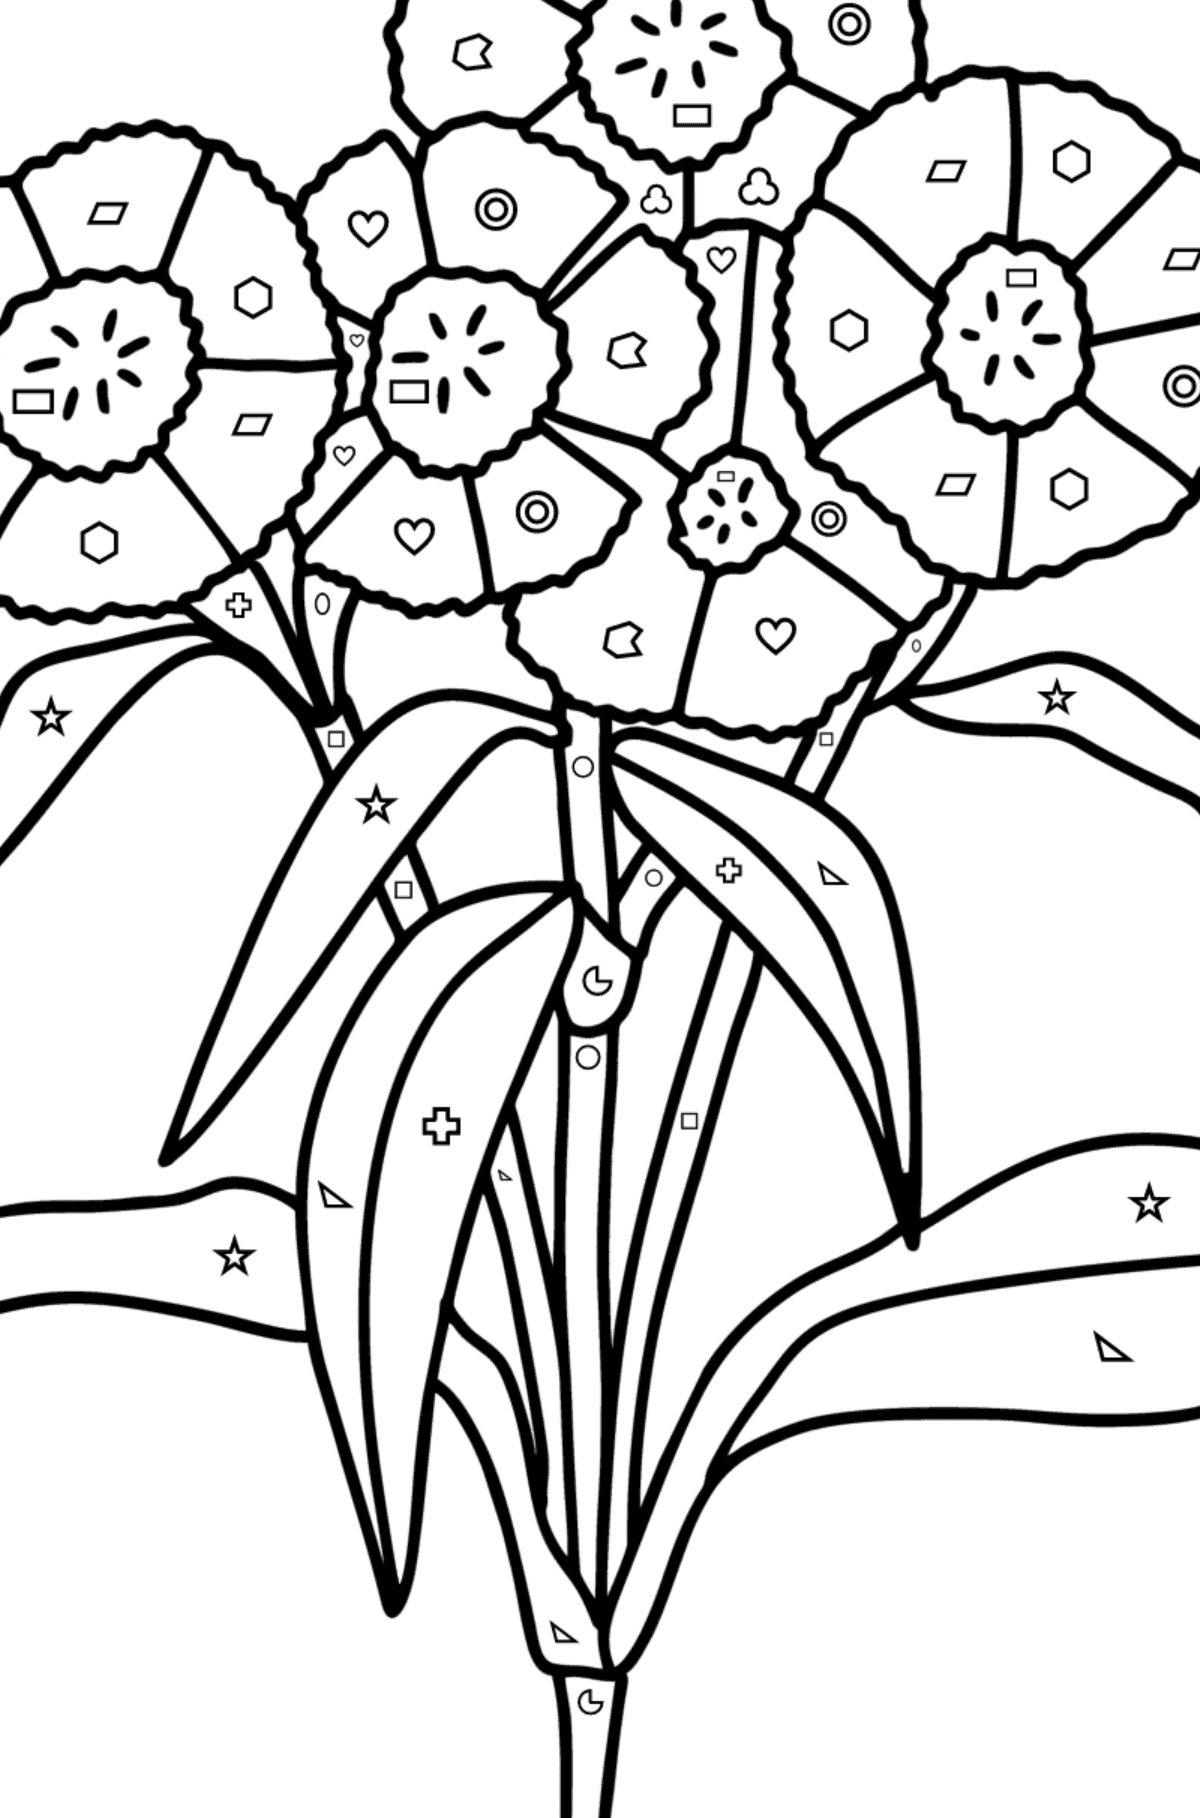 Carnations coloring page - Coloring by Geometric Shapes for Kids